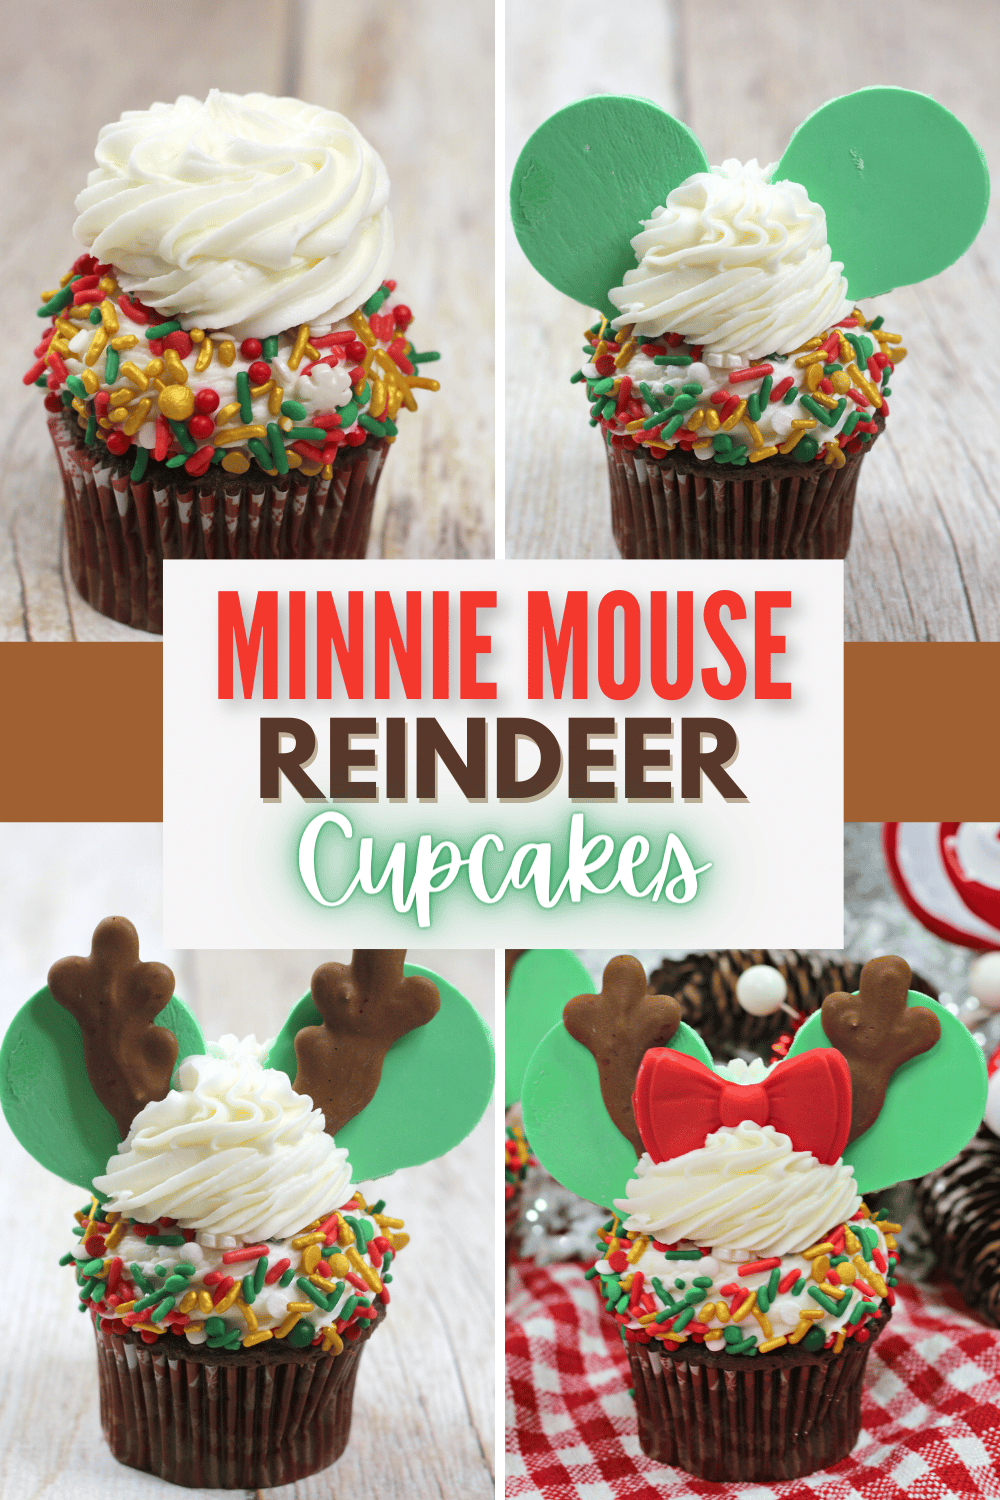 These Minnie Mouse Reindeer Cupcakes are the perfect festive treat for the holidays. The cupcakes are moist, tender, and irresistible. #minniemousecupcakes #reindeercupcakes #minniemousereindeercupcakes #christmascupcakes via @wondermomwannab